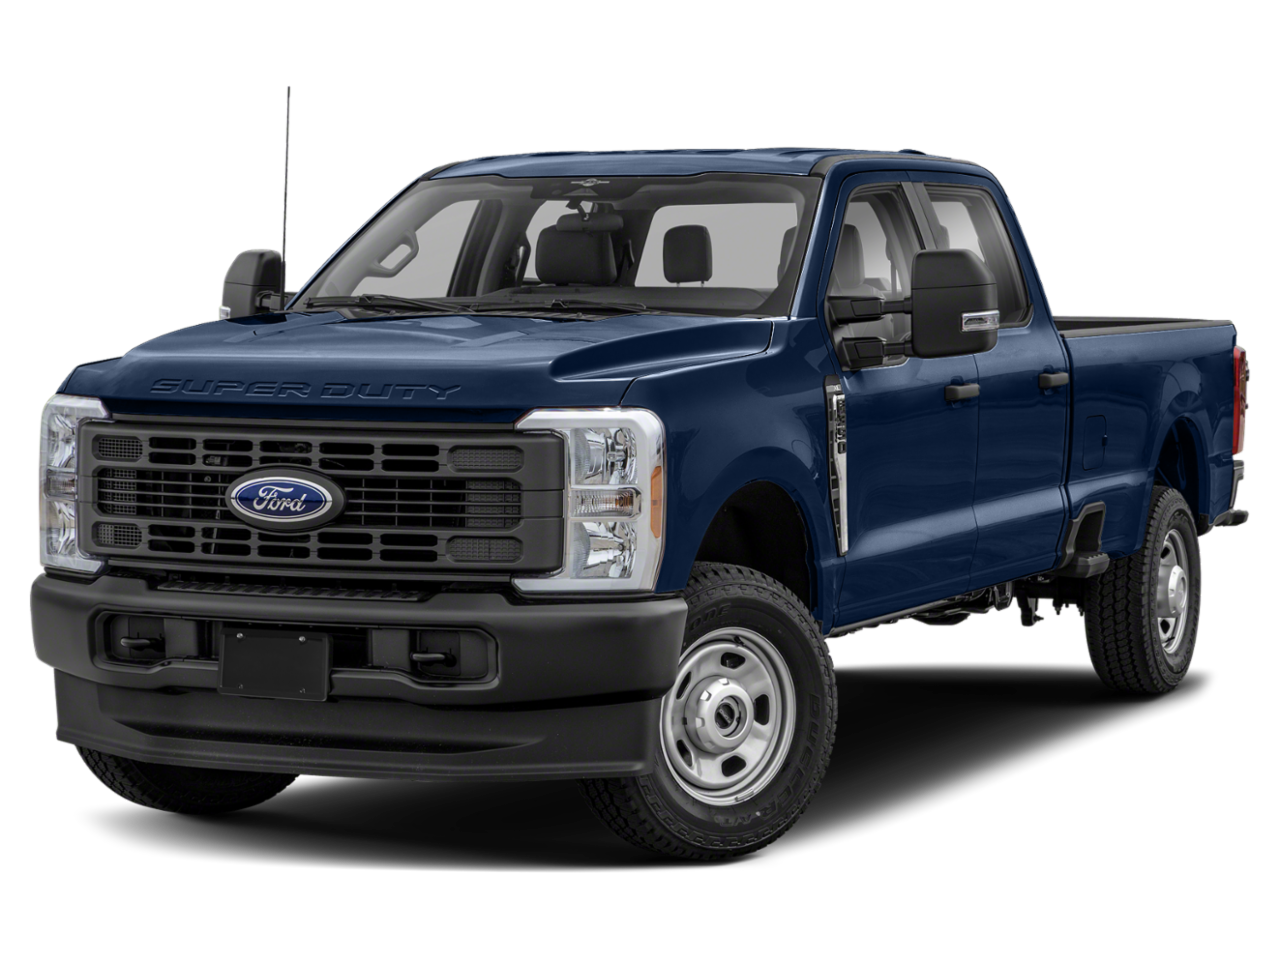 Collier Ford in Wetumpka, AL Alabama Ford Sales & Service